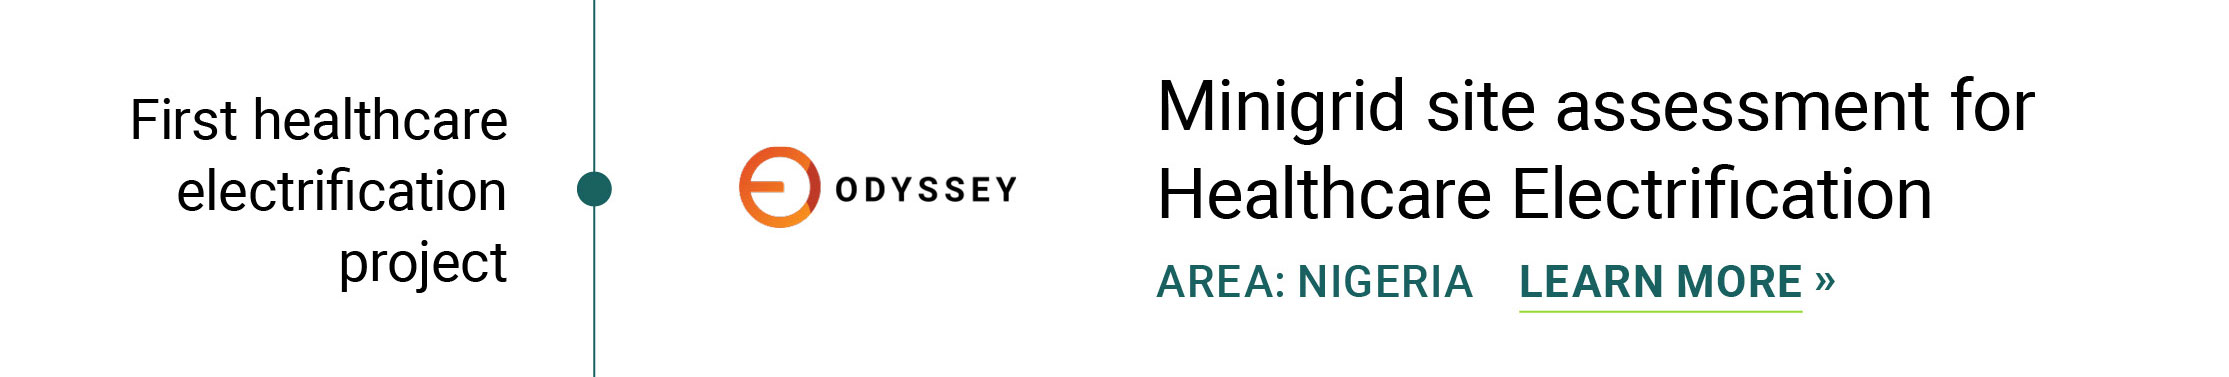 Dec 2021 Minigrid site assessment for Healthcare Electrification in Nigeria Odyssey for EMONE Nigeria First Healthcare electrification project